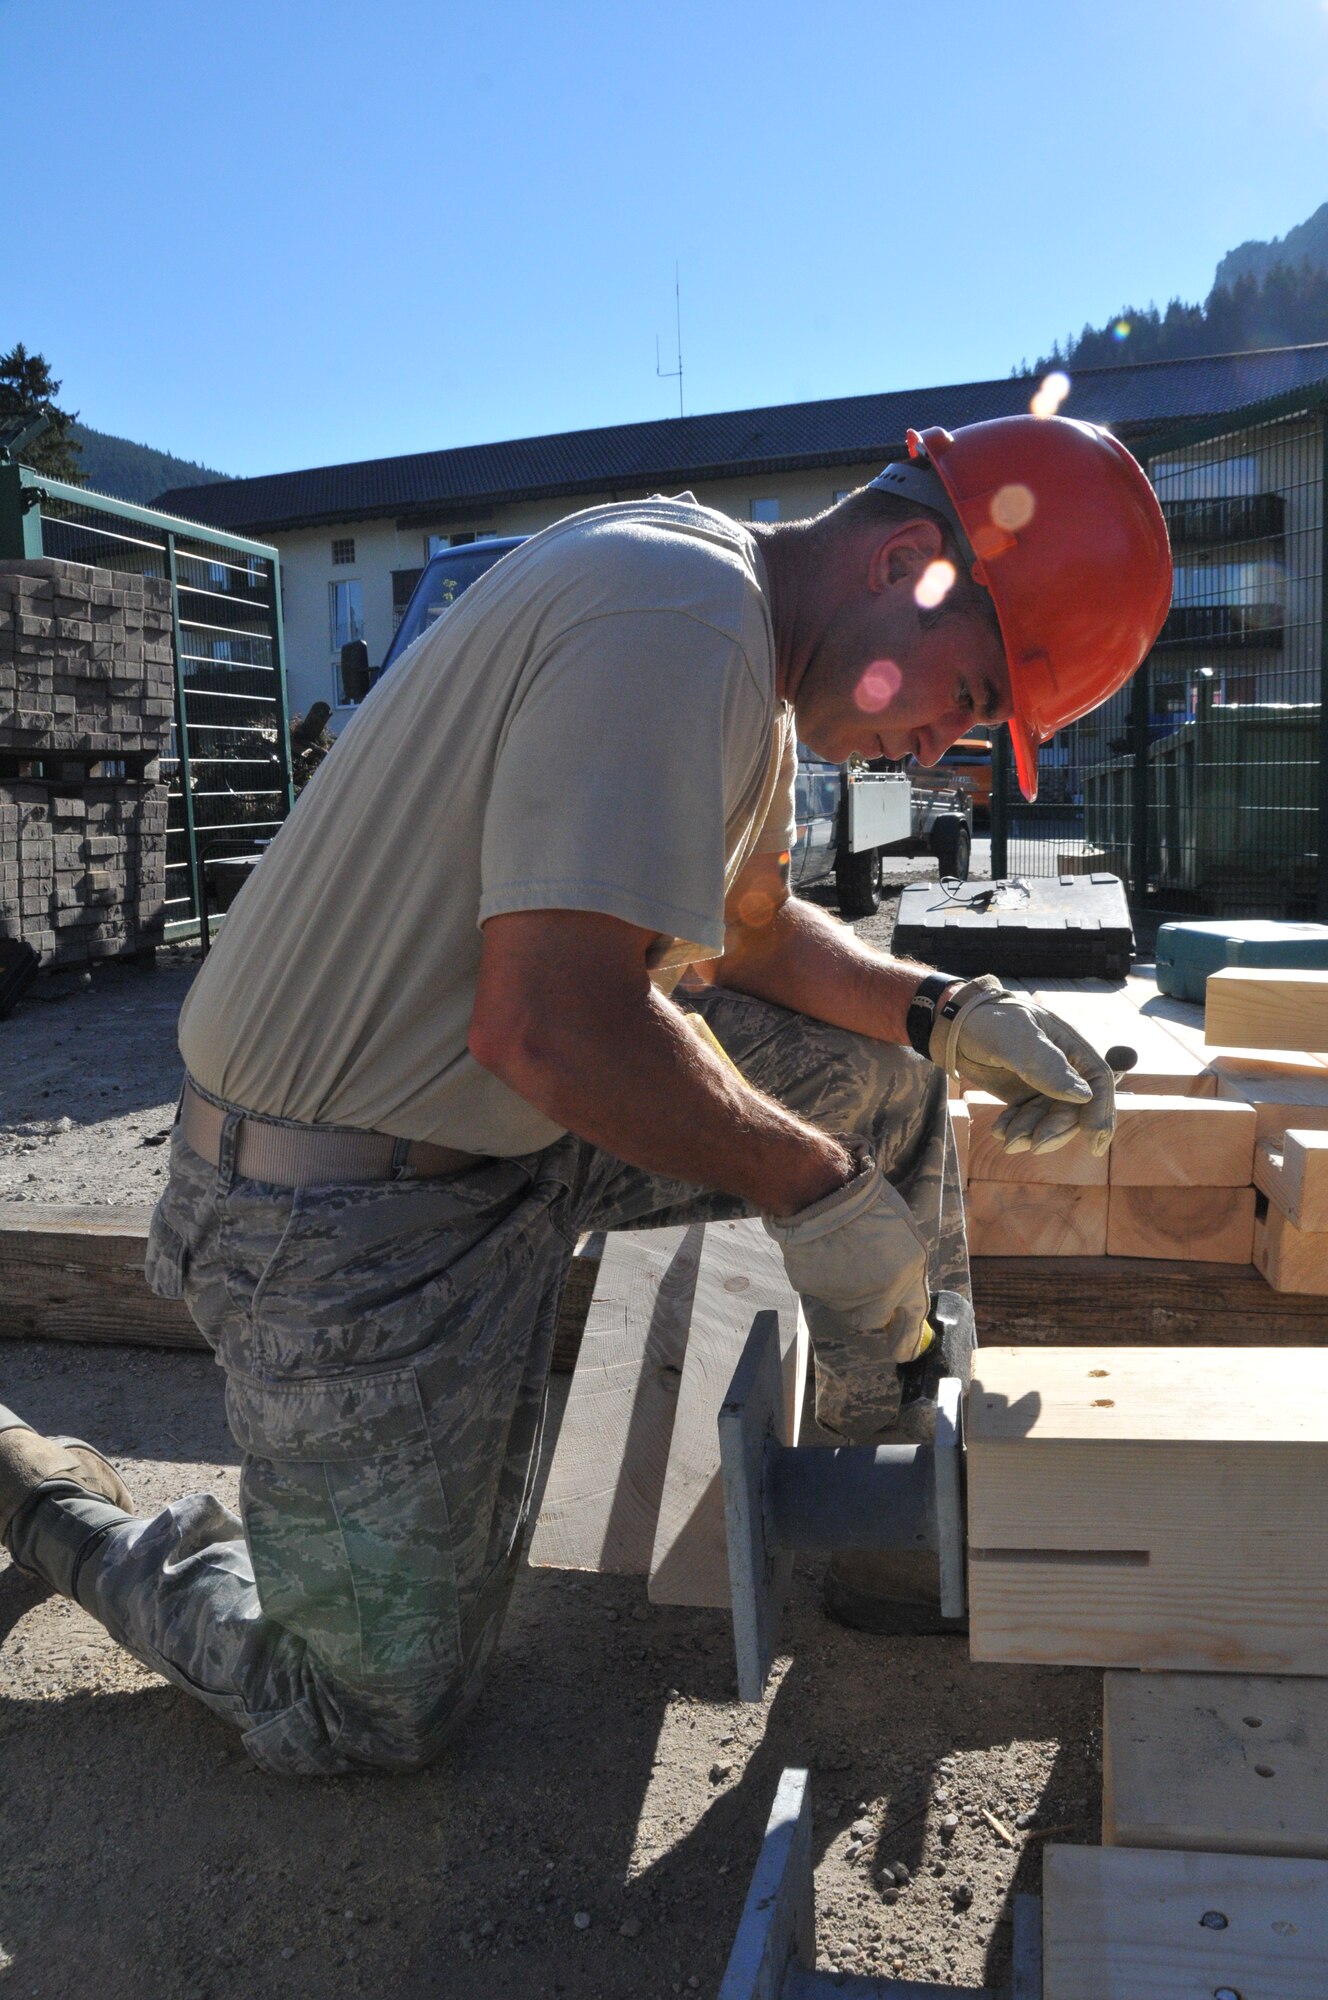 Wyoming Air National Guard’s Tech. Sgt. James Brown, 153rd Civil Engineer Squadron, prepares beams for a car port structure at the NATO School recreation center Aug. 20, 2012, Oberammergau, Germany.  Airmen from the 153rd CES are putting their skills to work as they conduct their annual training. (U.S. Air Force photo by Staff Sgt. Natalie Stanley)